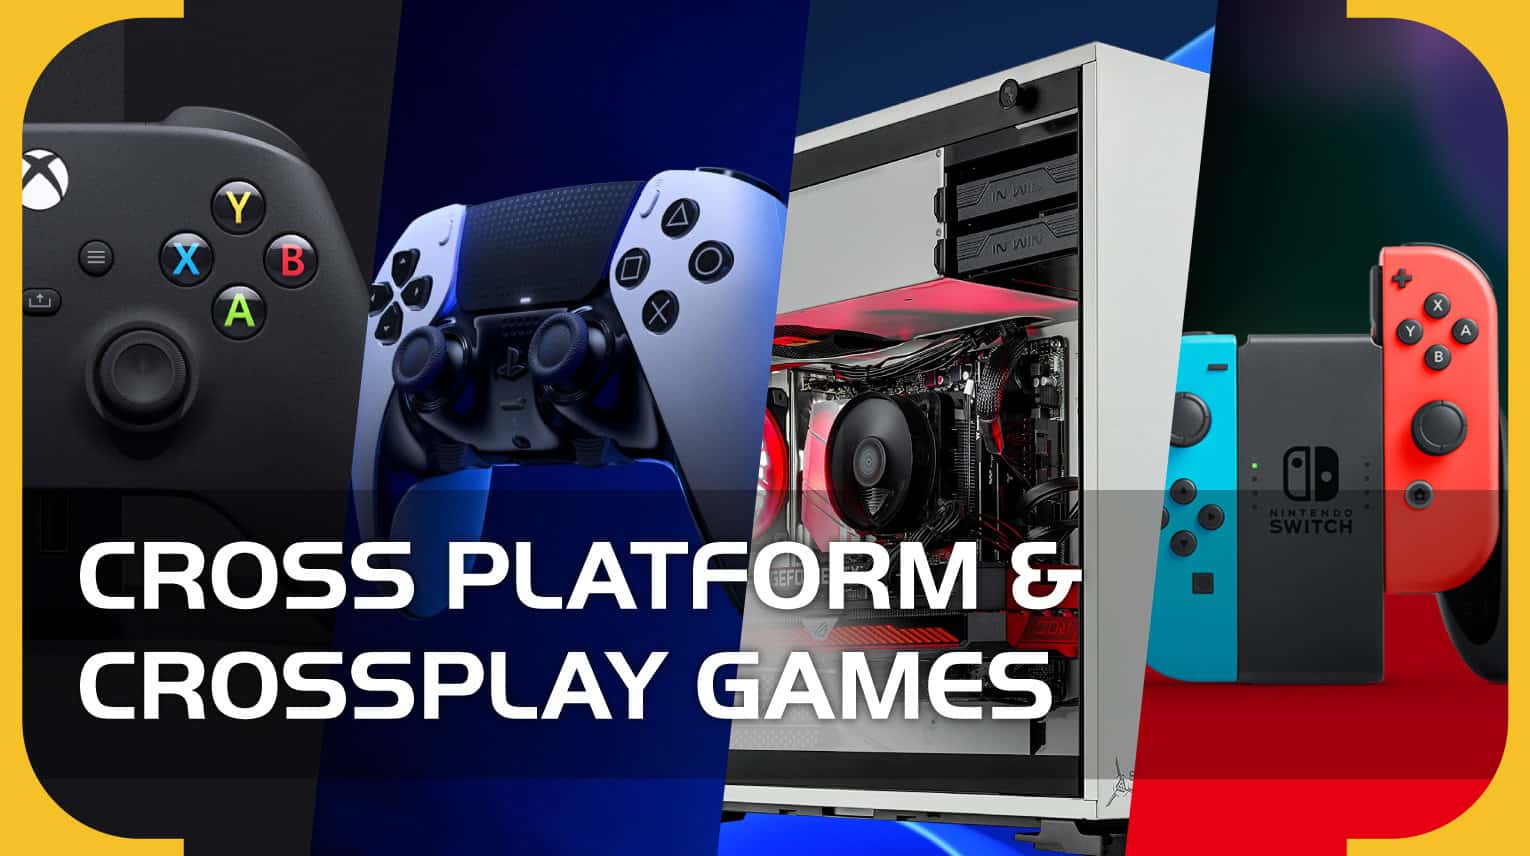 Every Cross Platform & Crossplay Game (October 2022) PS5, Xbox Series X, PC, One, Nintendo Switch) VideoGamer.com